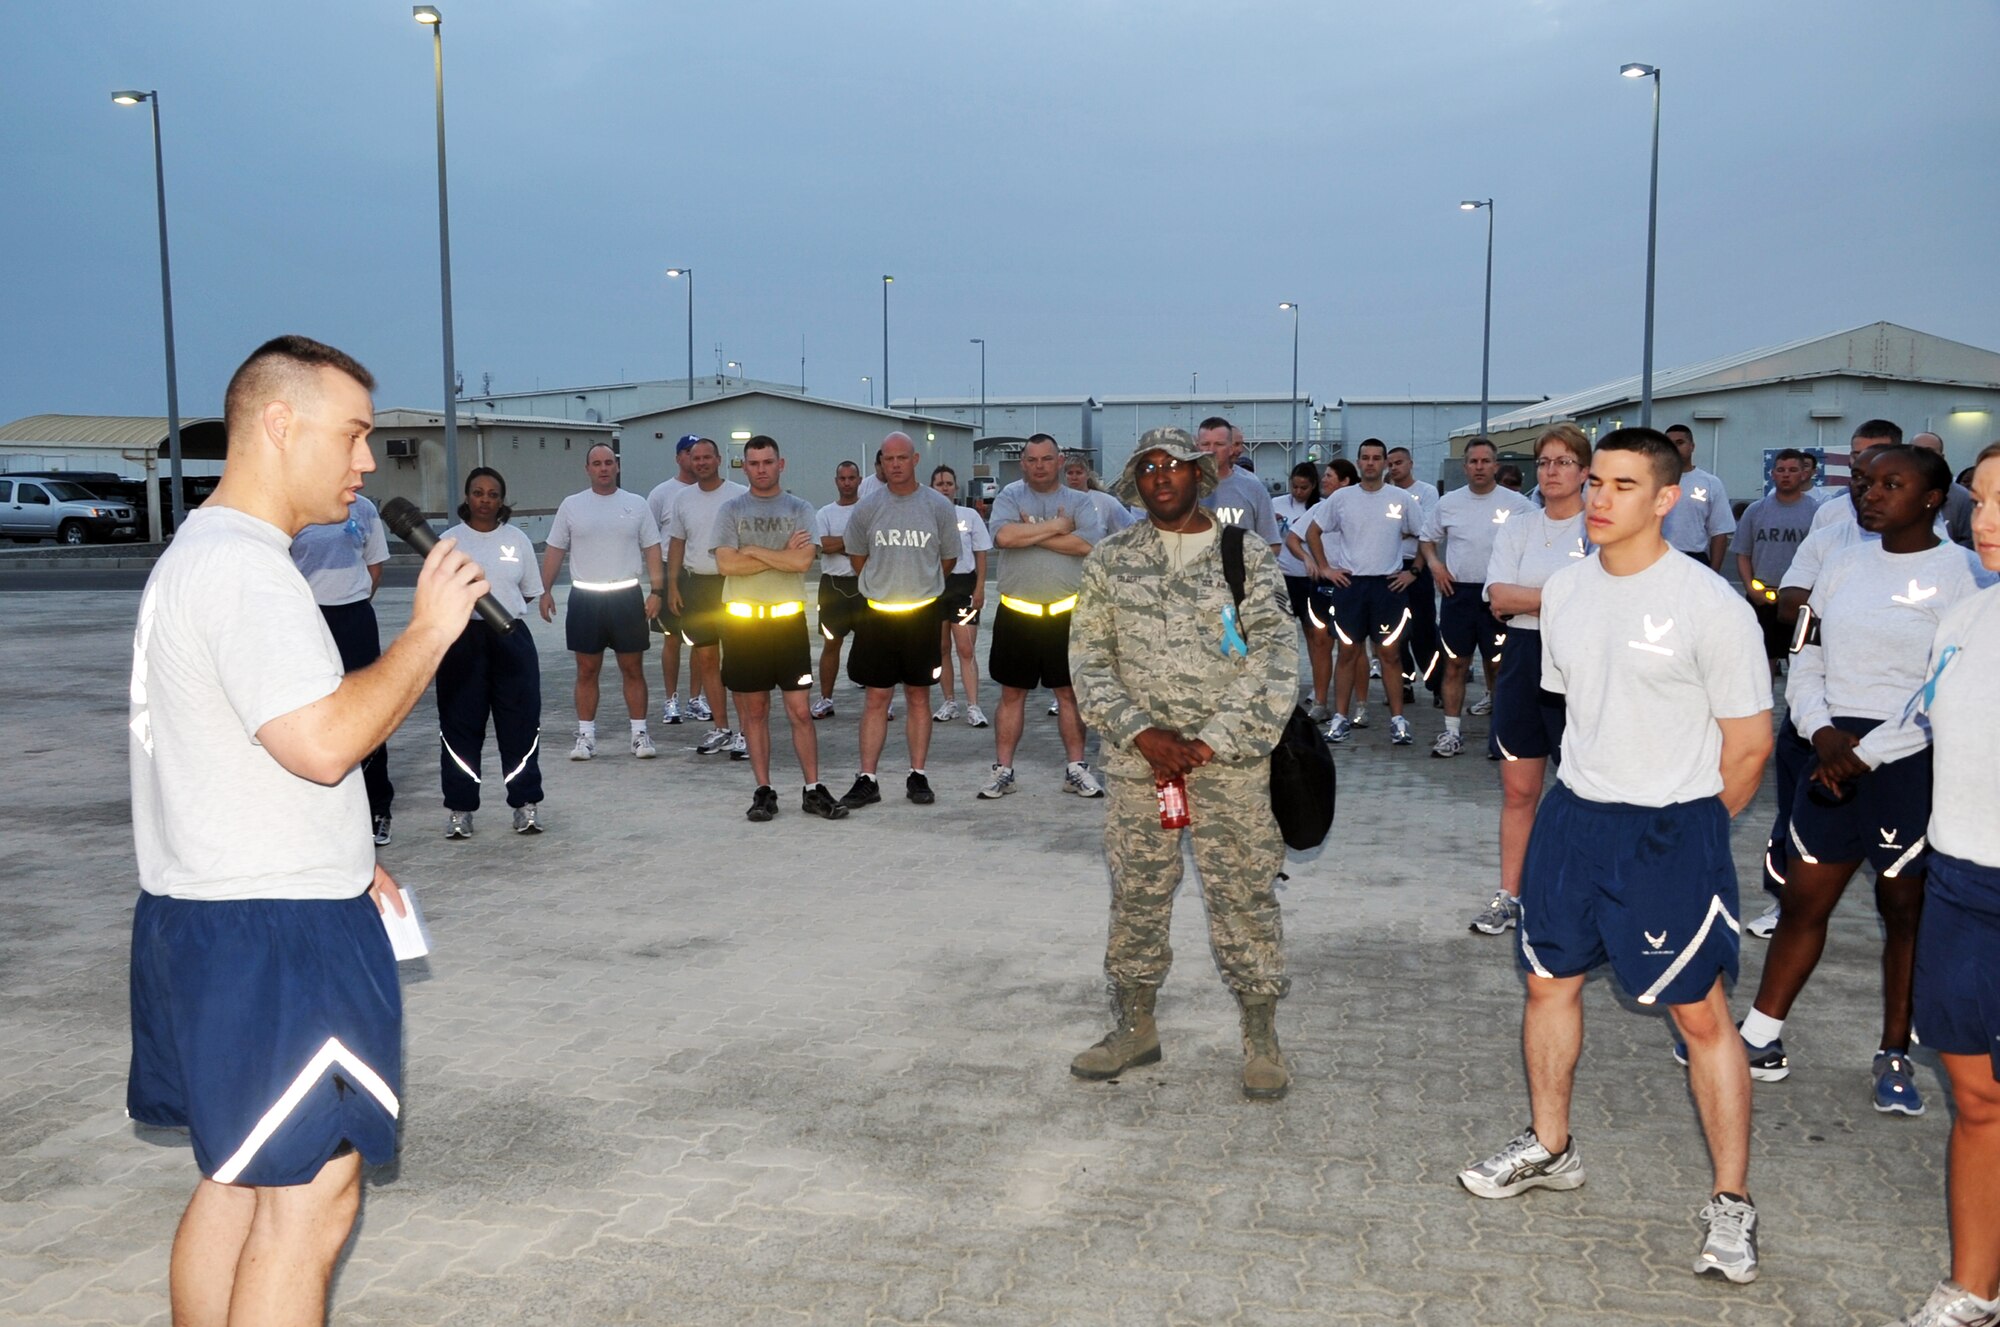 Capt. Richard Laca, 380th Air Expeditionary Wing sexual assault response coordinator, talks to the attendees to the "Walk A Mile In Their Shoes" event put on by the 380th Air Expeditionary Wing in observance of Sexual Assault Awareness Month at a non-disclosed base in Southwest Asia on April 19, 2010. Captain Laca is deployed from Eielson Air Force Base, Alaska. (U.S. Air Force Photo/Master Sgt. Scott T. Sturkol/Released)